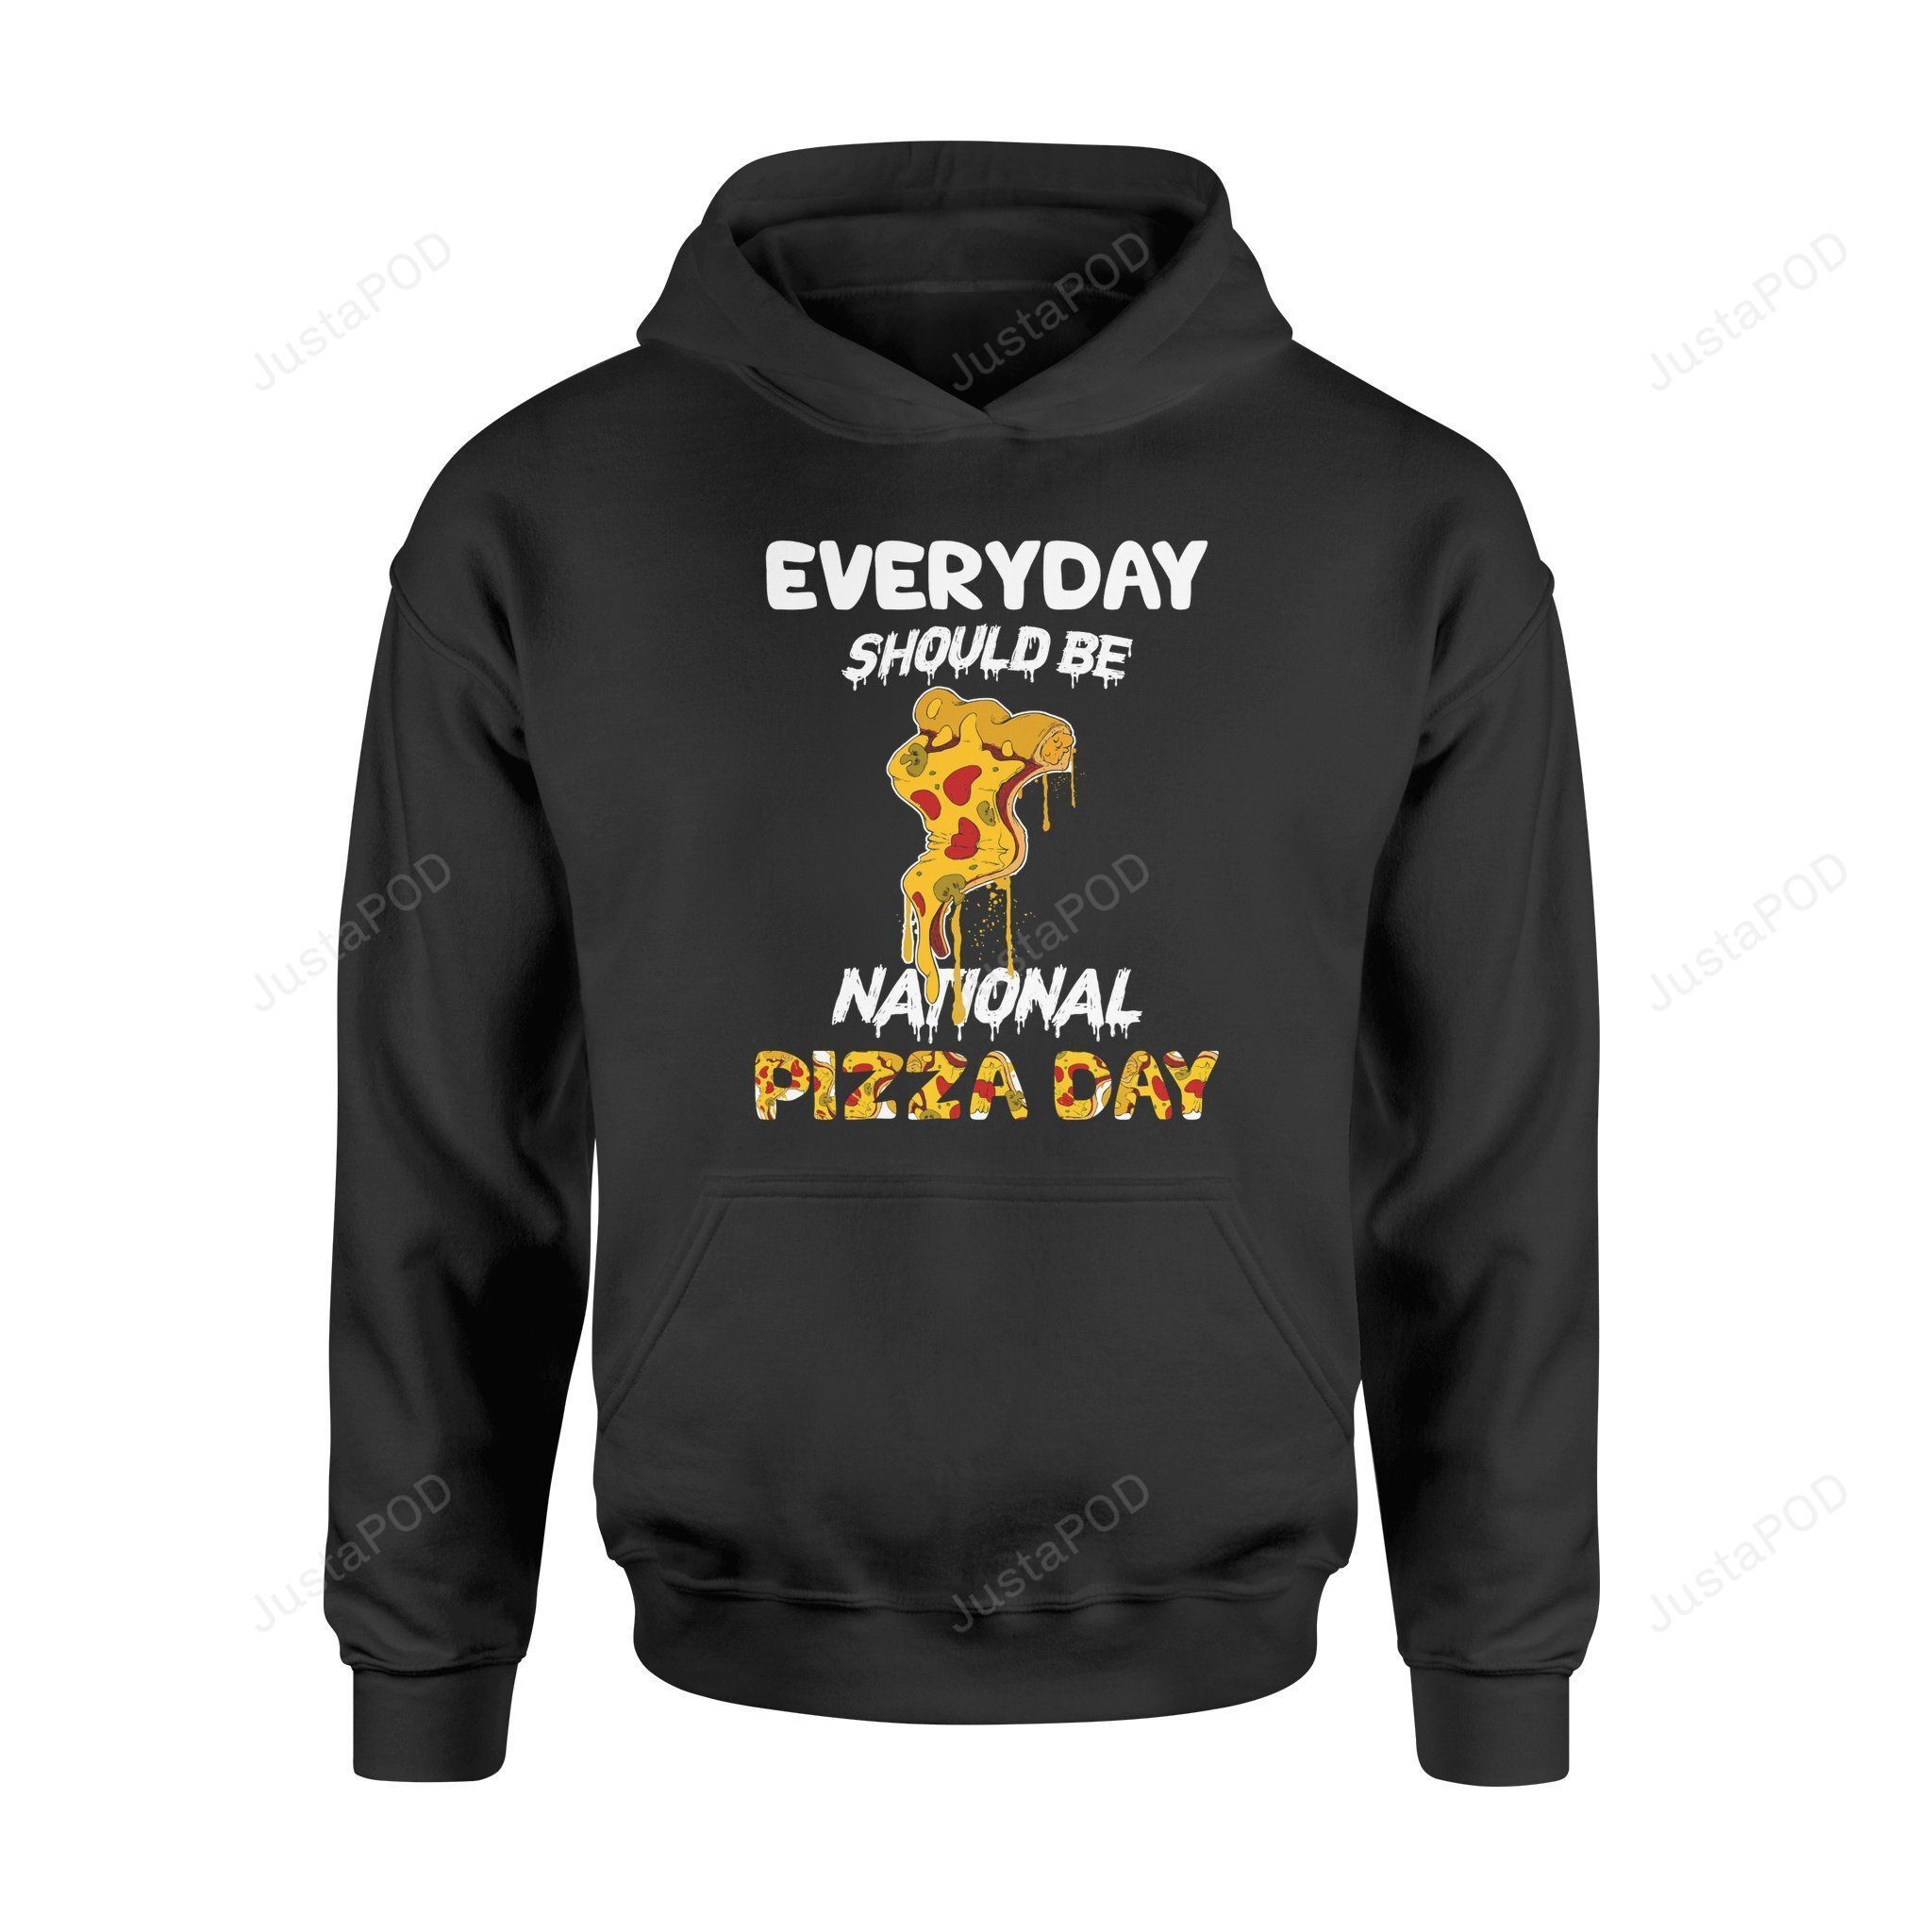 Besteever Everyday should be National Pizza Day TL295 � Standard 3D Hoodie For Men Women All Over 3D Printed Hoodie